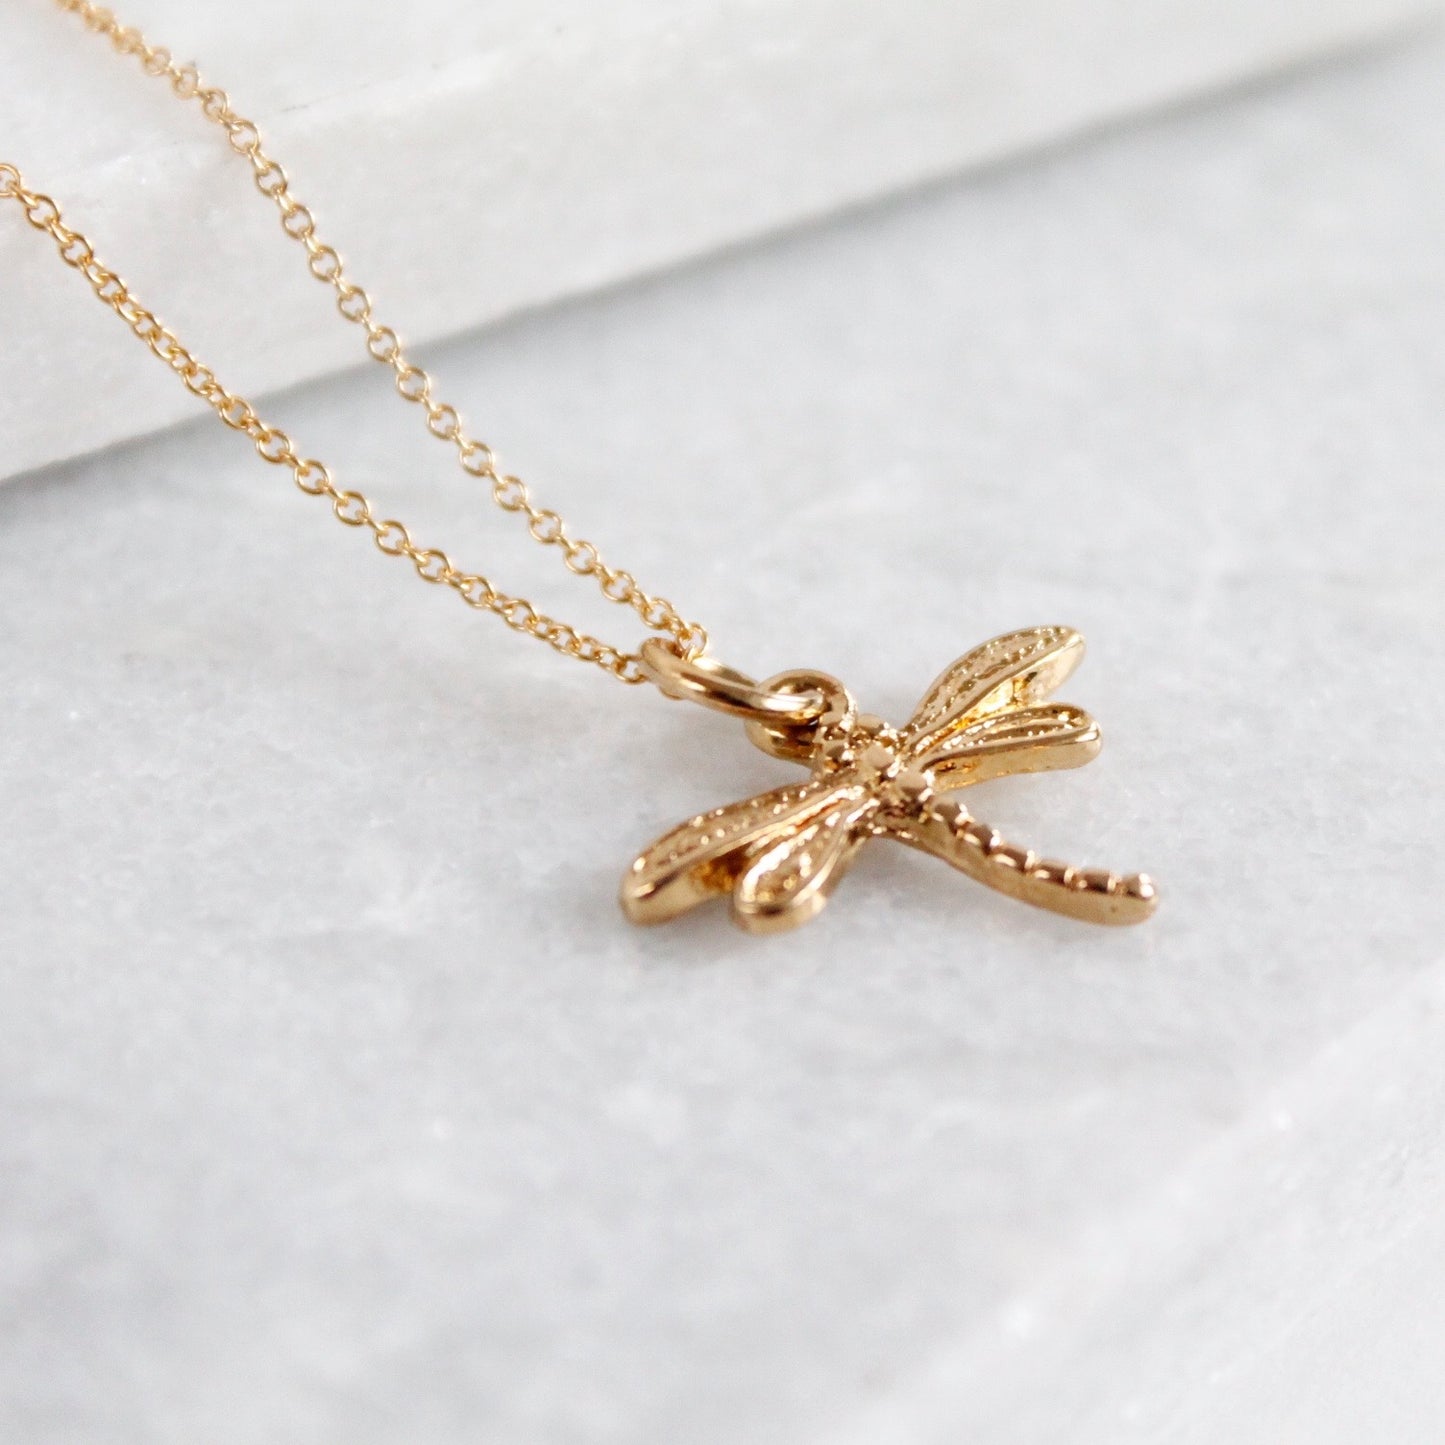 Changes Dragonfly Necklace